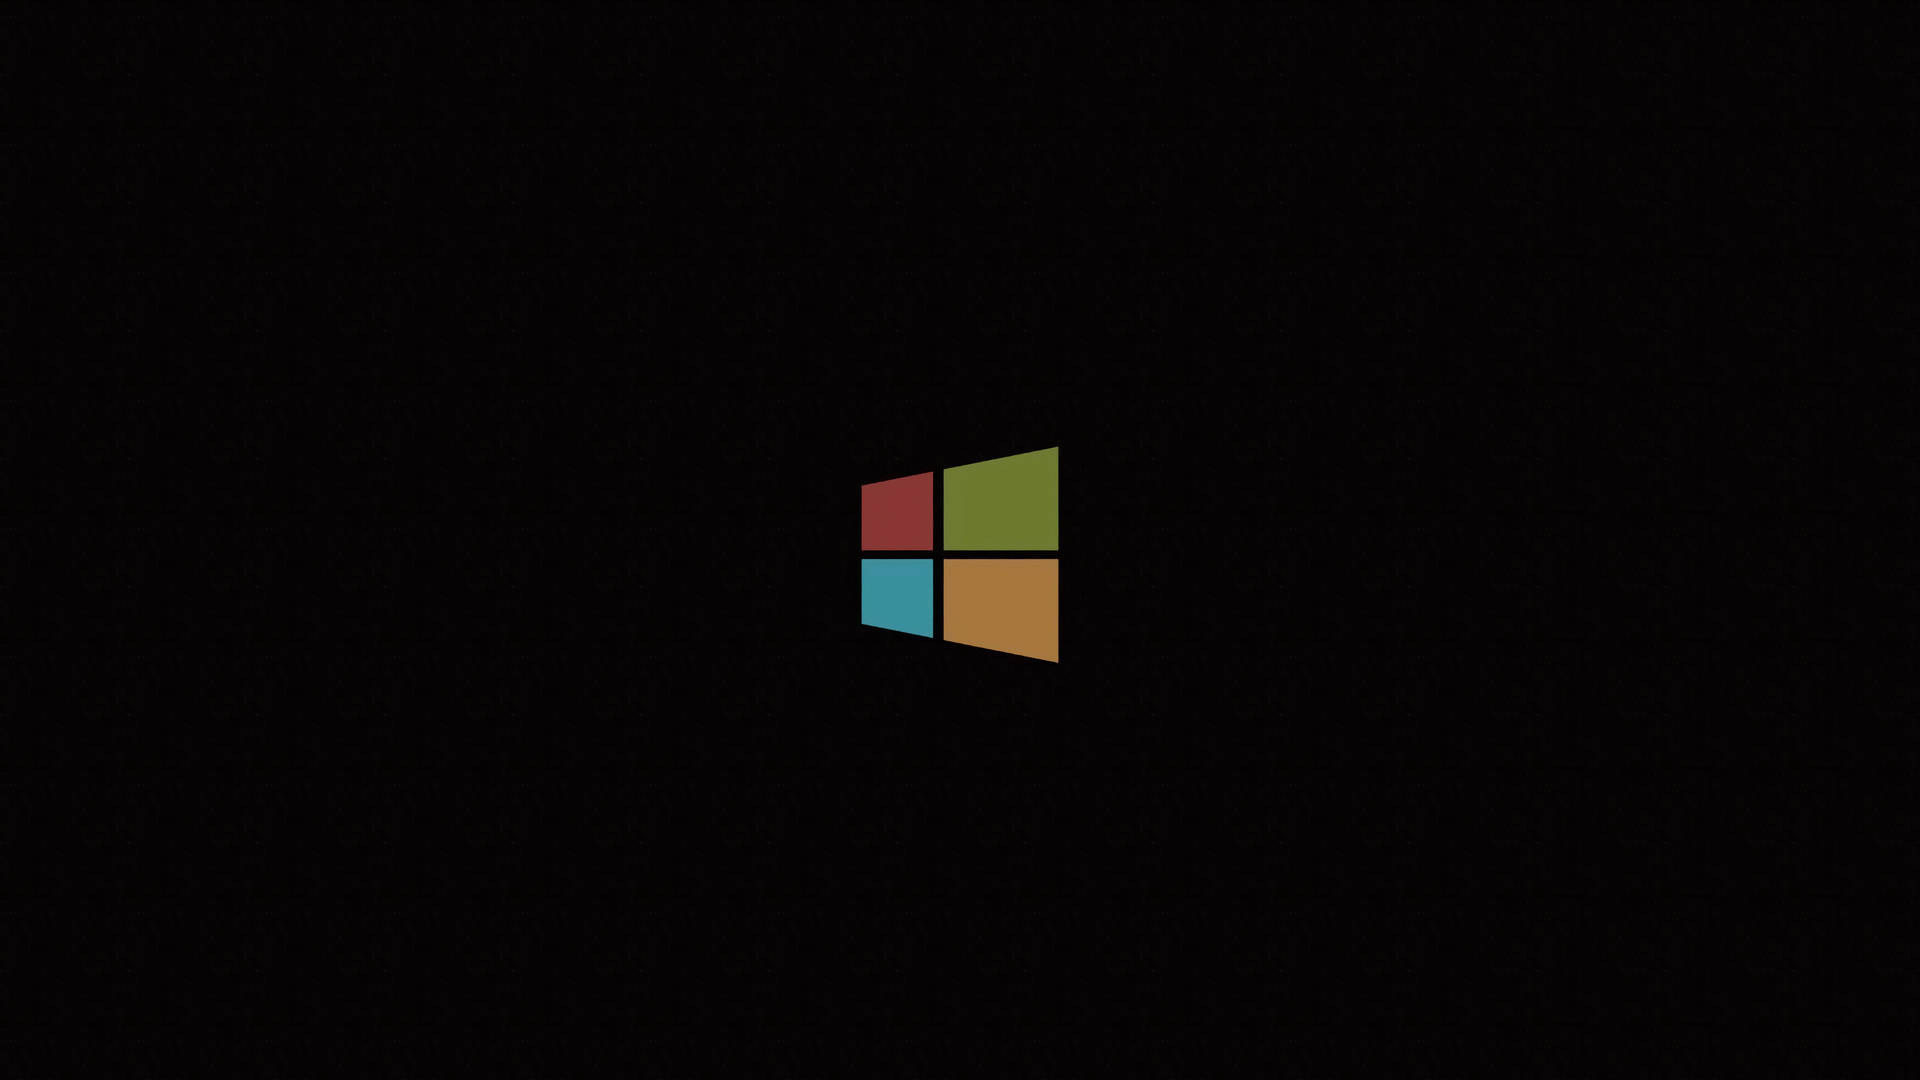 Windows 10 1920X1080 Wallpaper and Background Image